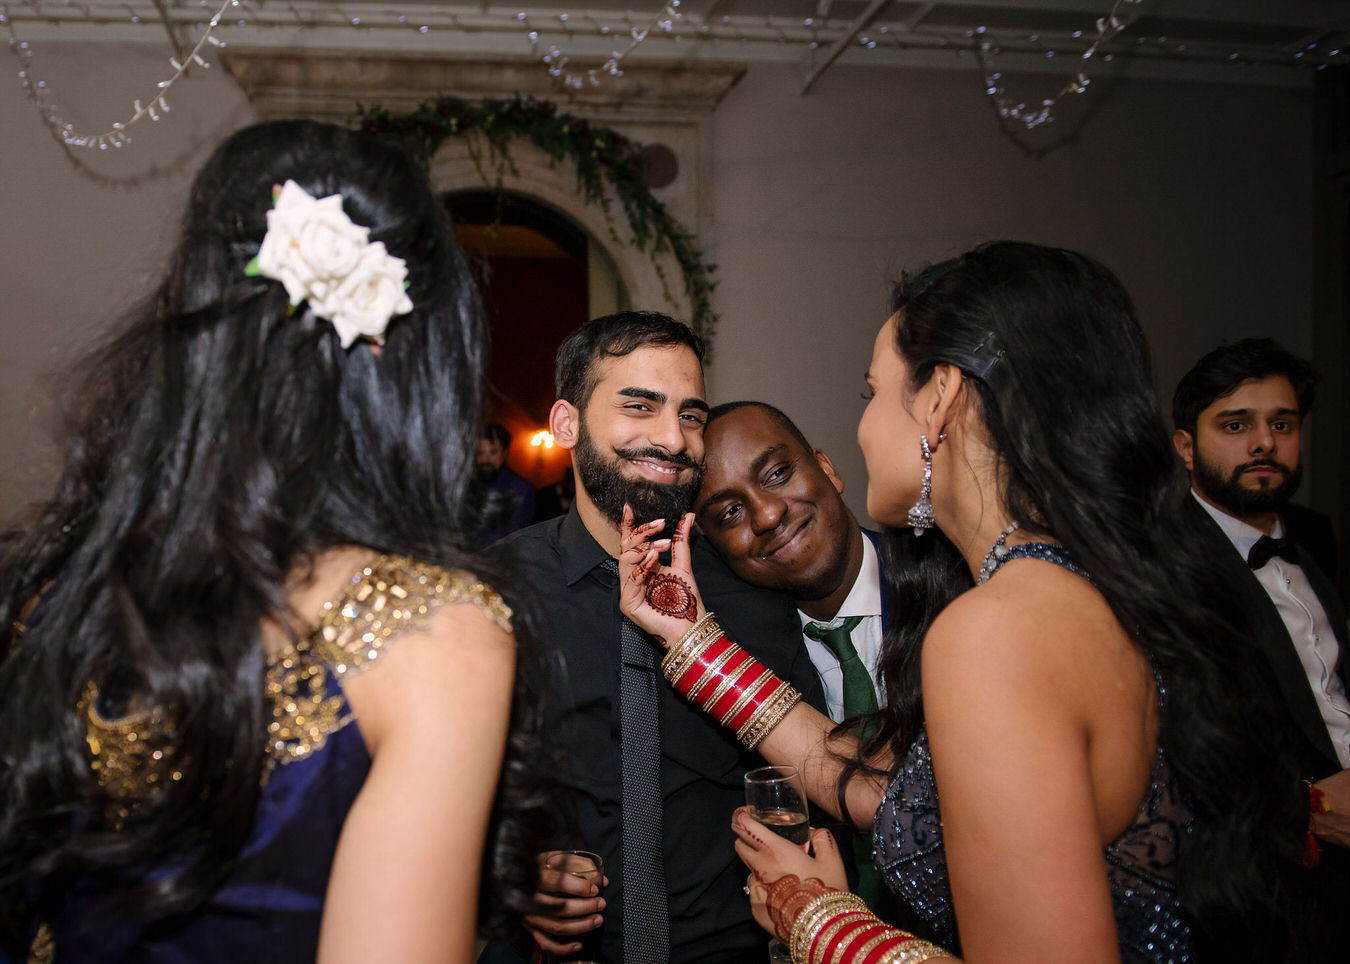 Documentary Asian wedding photographer captures a moment between the bride and one of her friends, the bride is touching her friend’s beard.